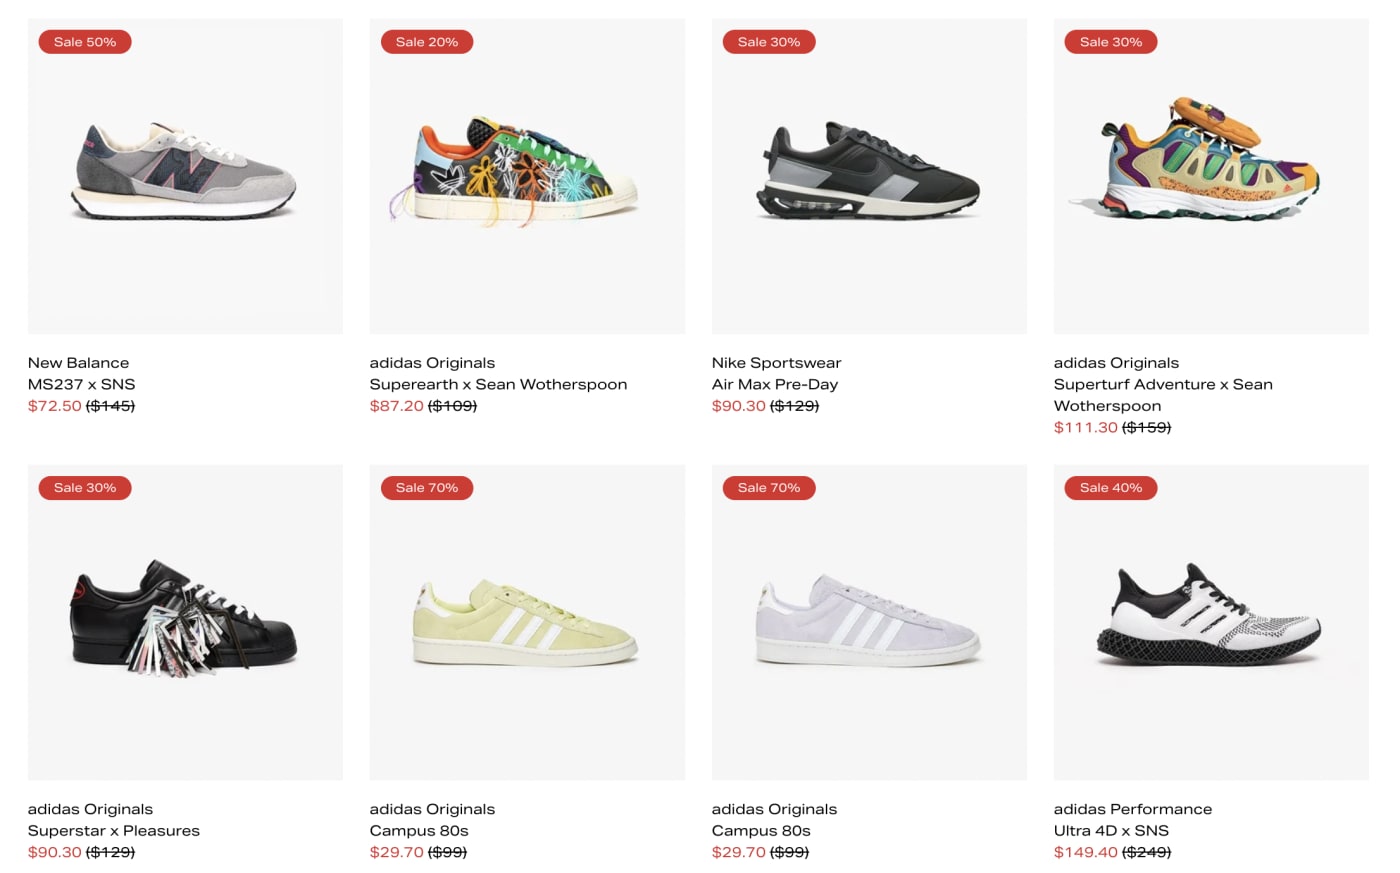 Zijdelings Microprocessor God 15 Sneaker Stores Online With the Best Sale Sections | Complex